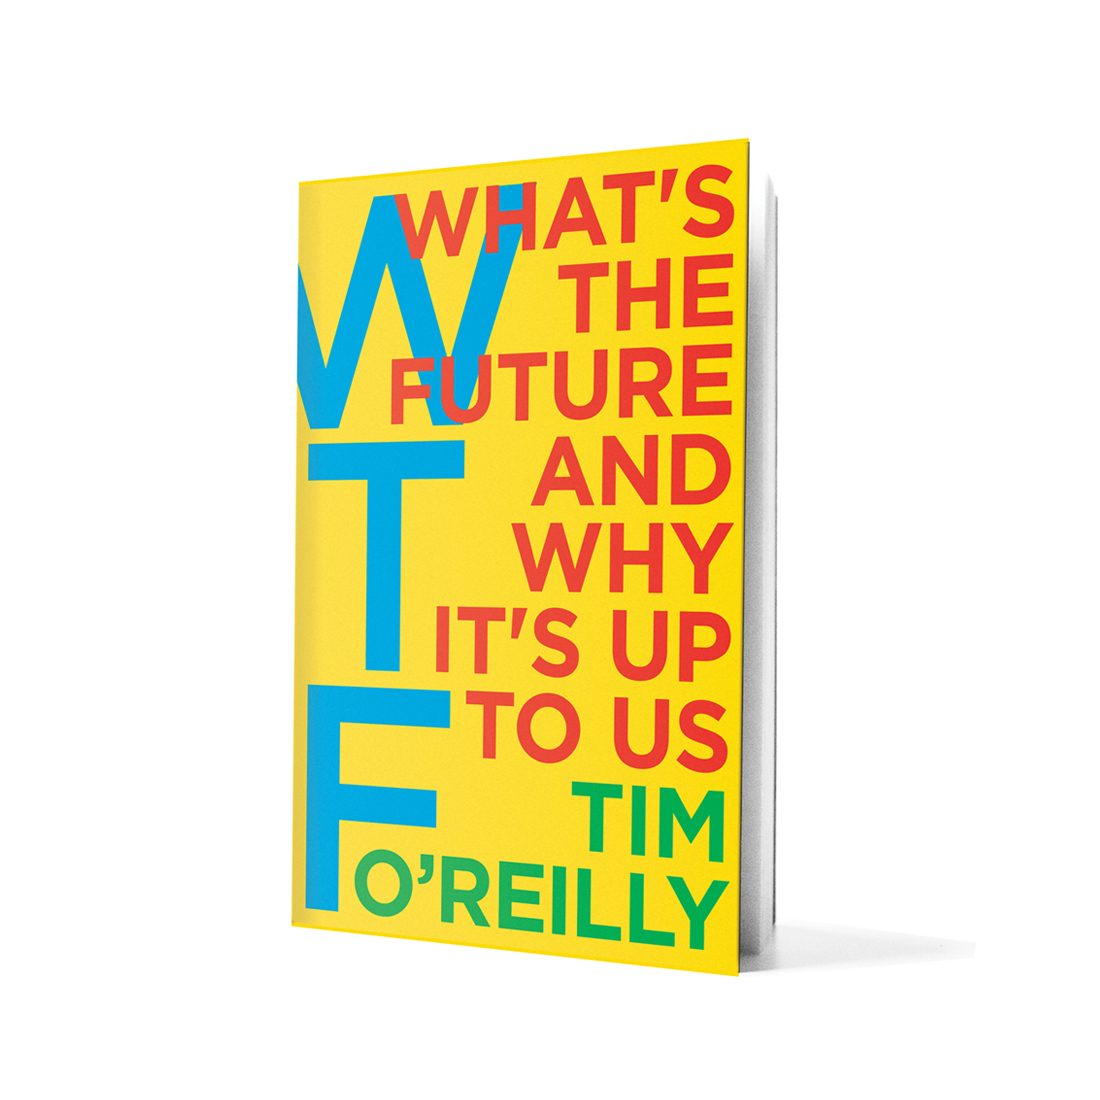 Book WTF in white background